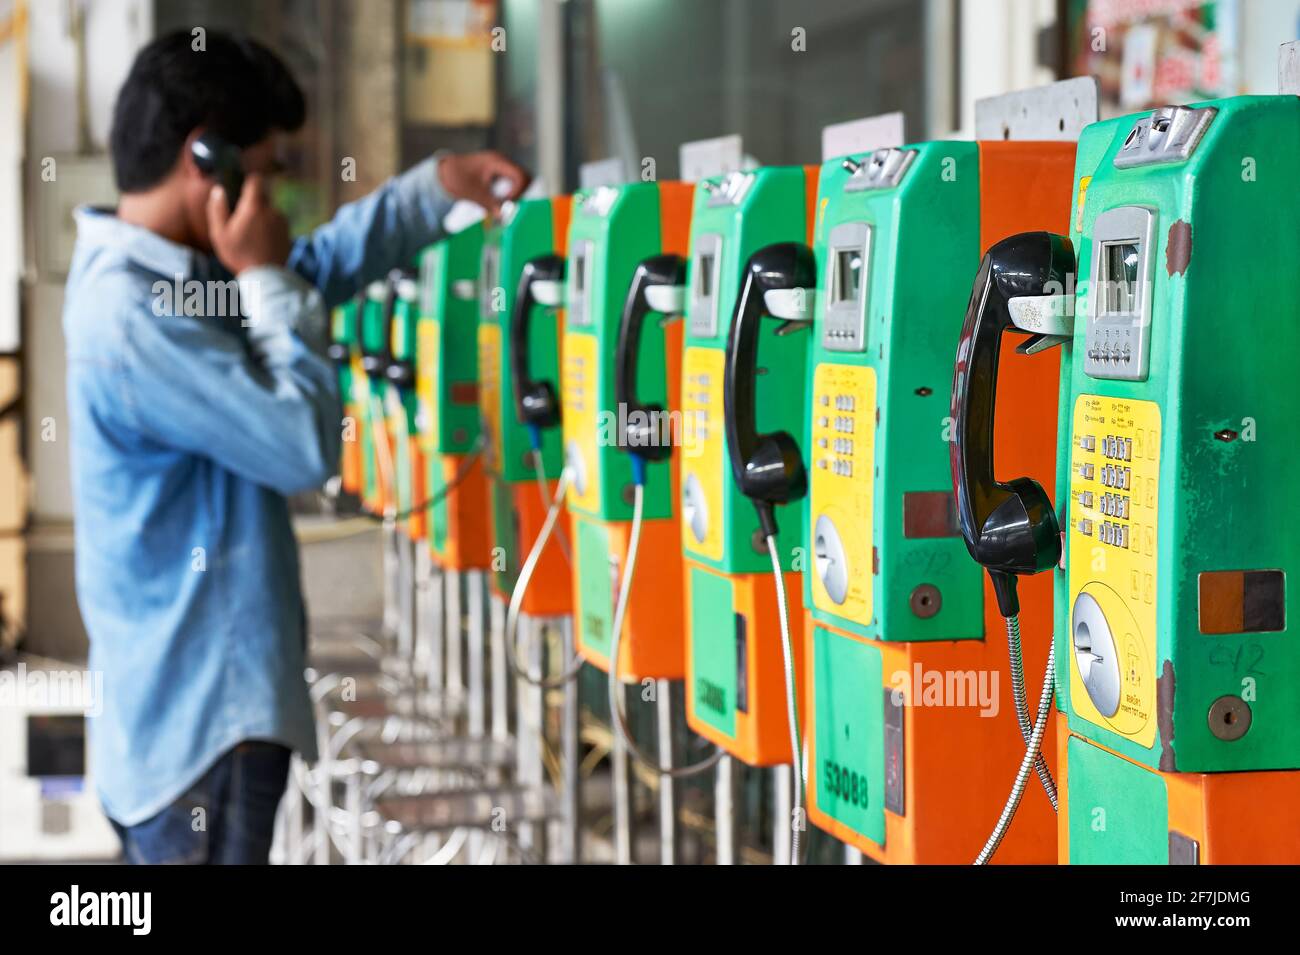 One person is using one of many typical green and orange colored public telephones in a row, placed inside the train station in Bangkok, Thailand Stock Photo